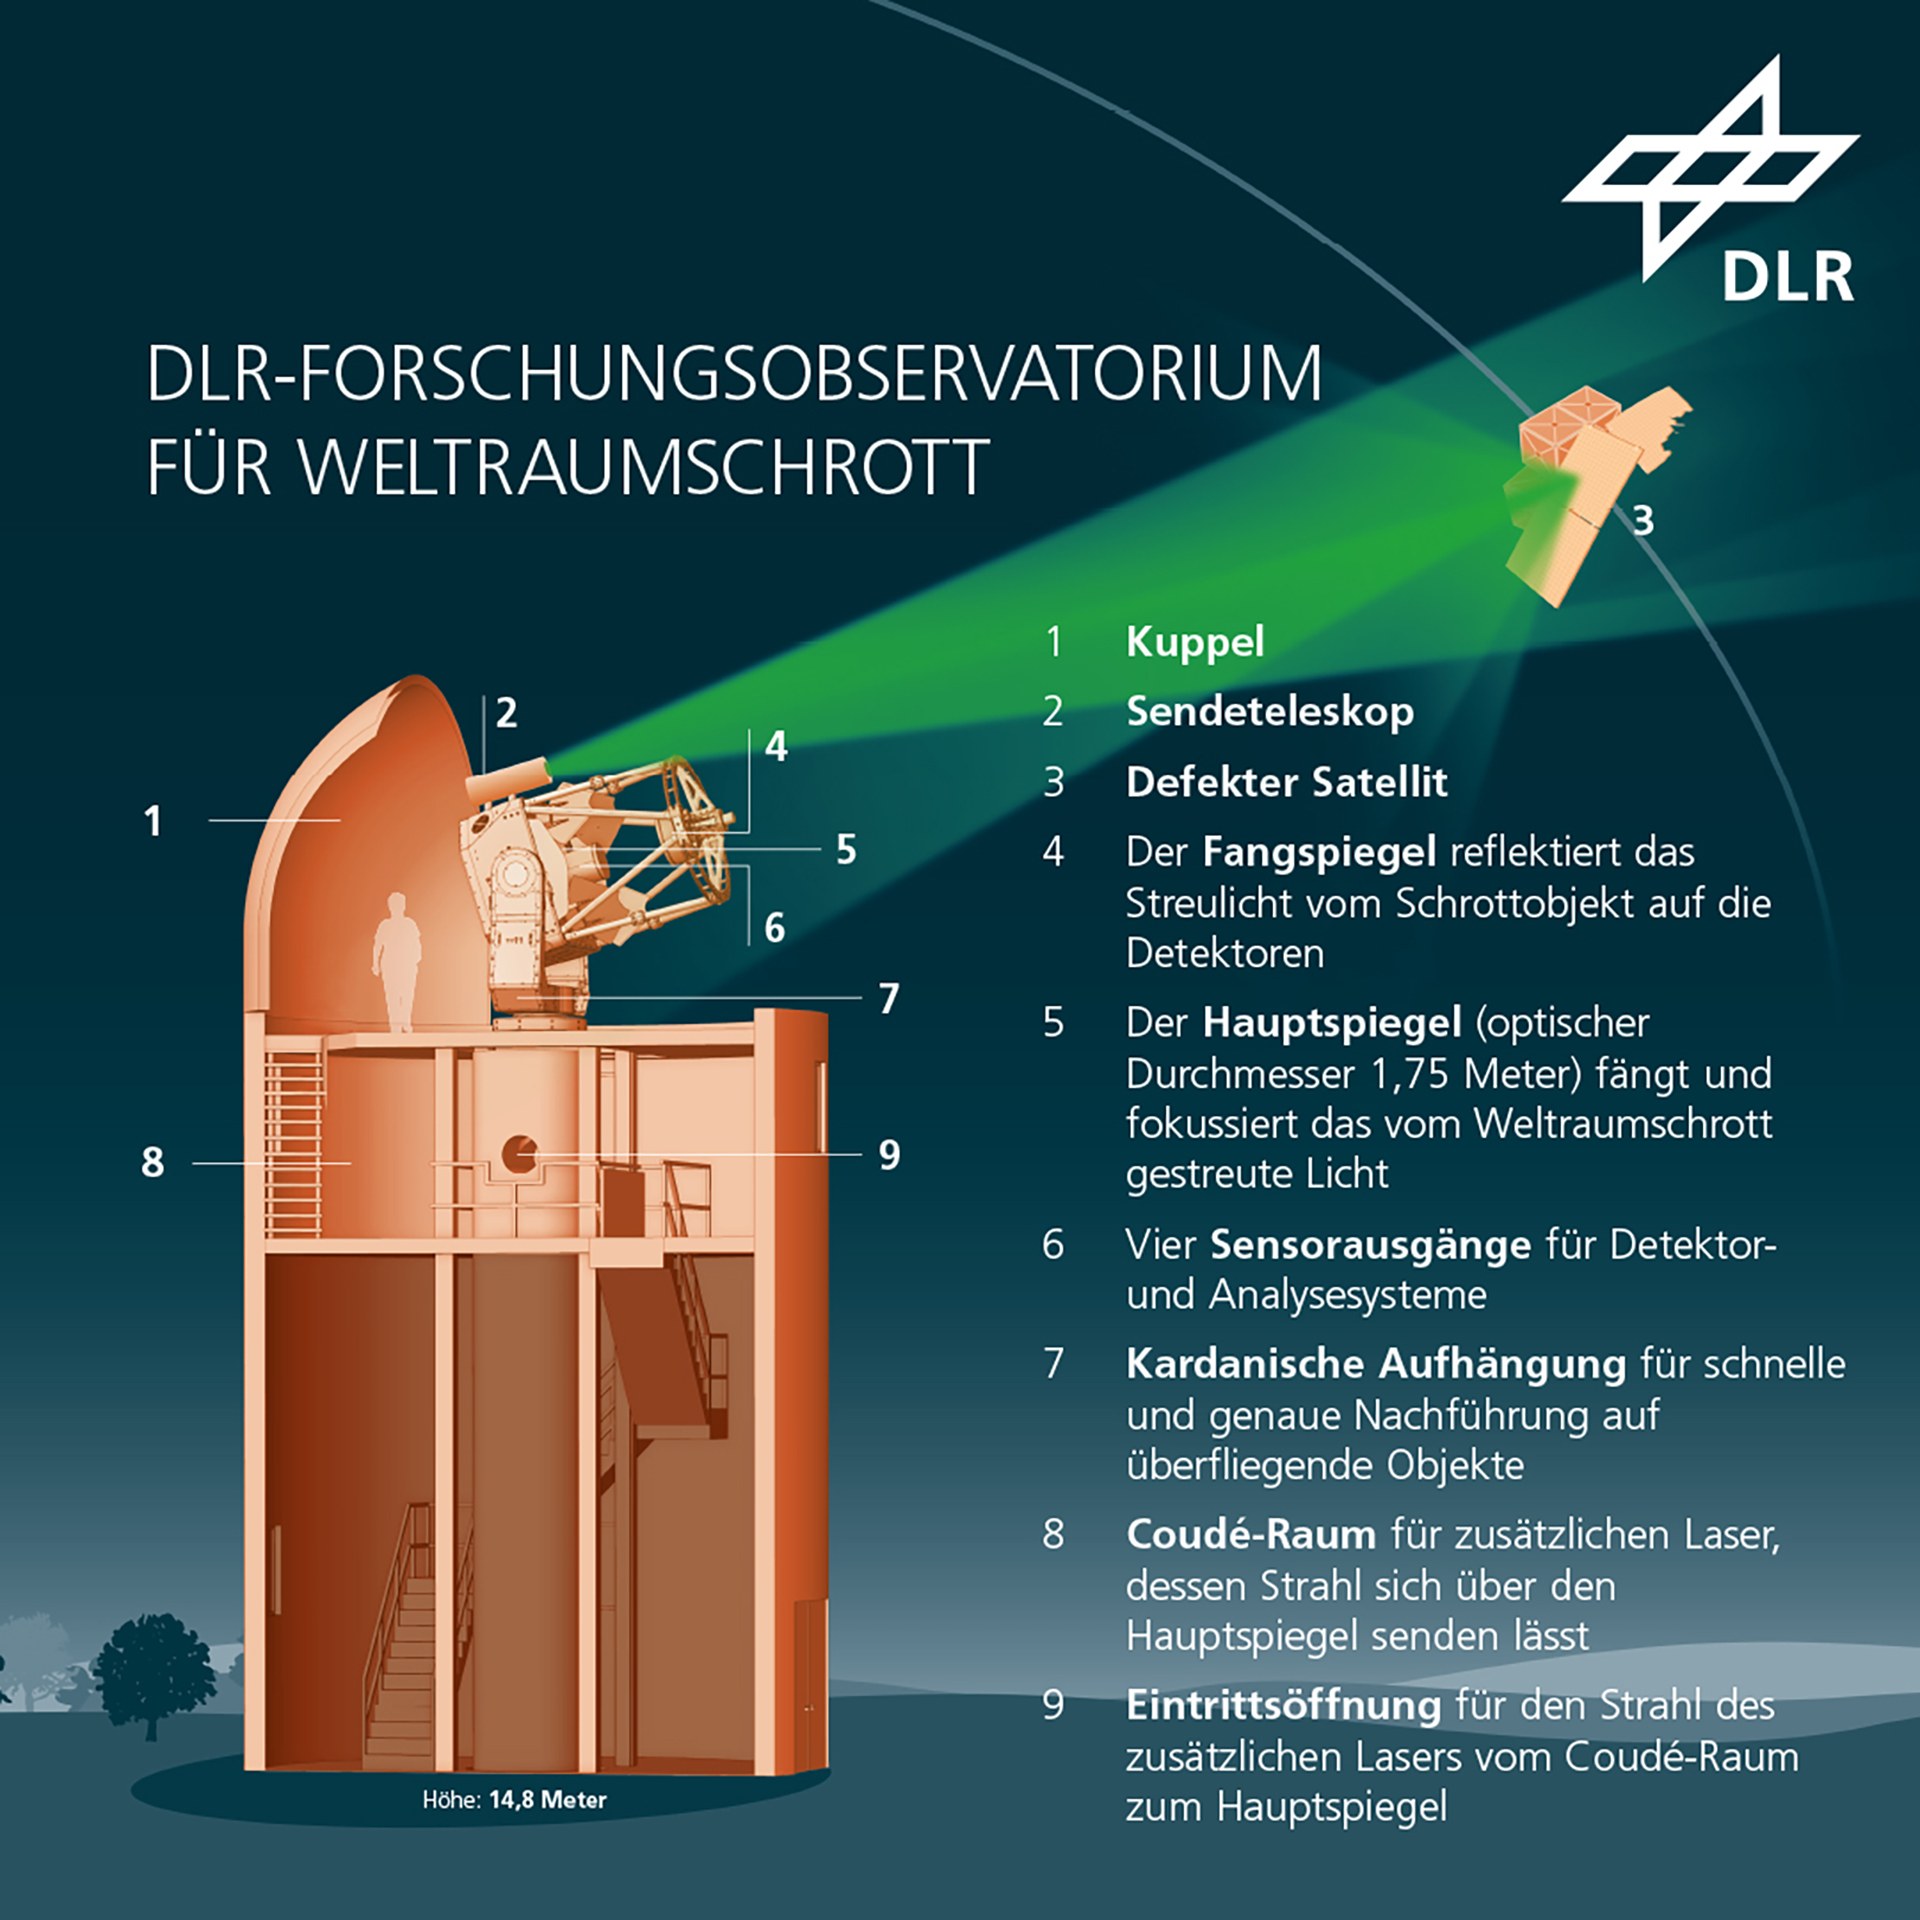 Overview of the structure of the observatory